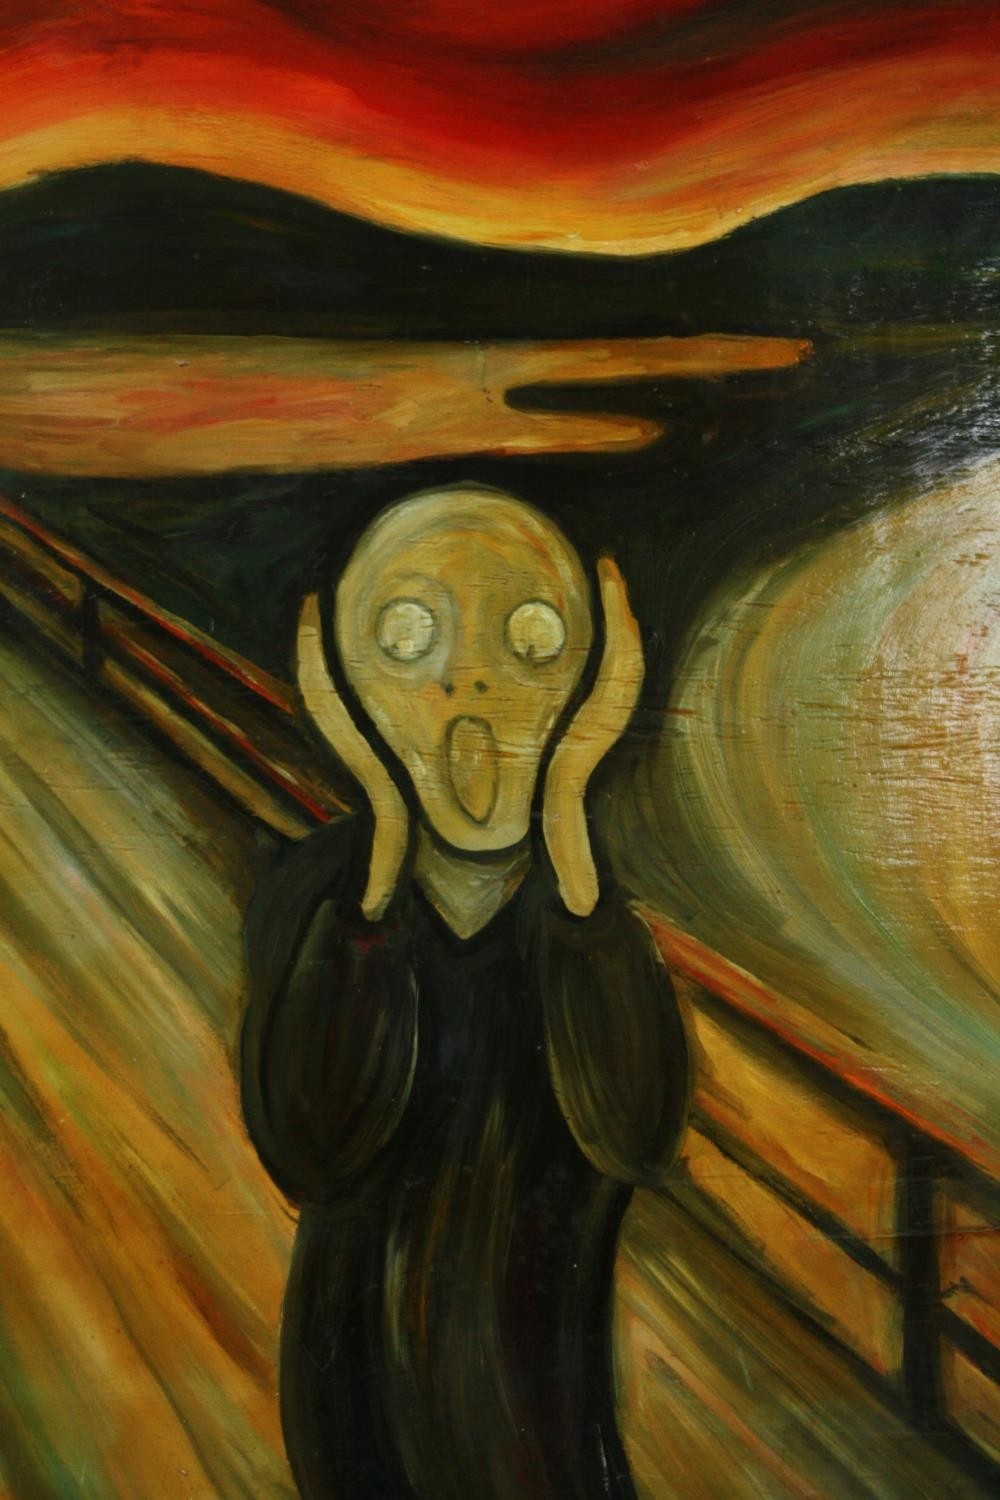 Artwork by Edvard Munch, The Scream, Made of oil on board